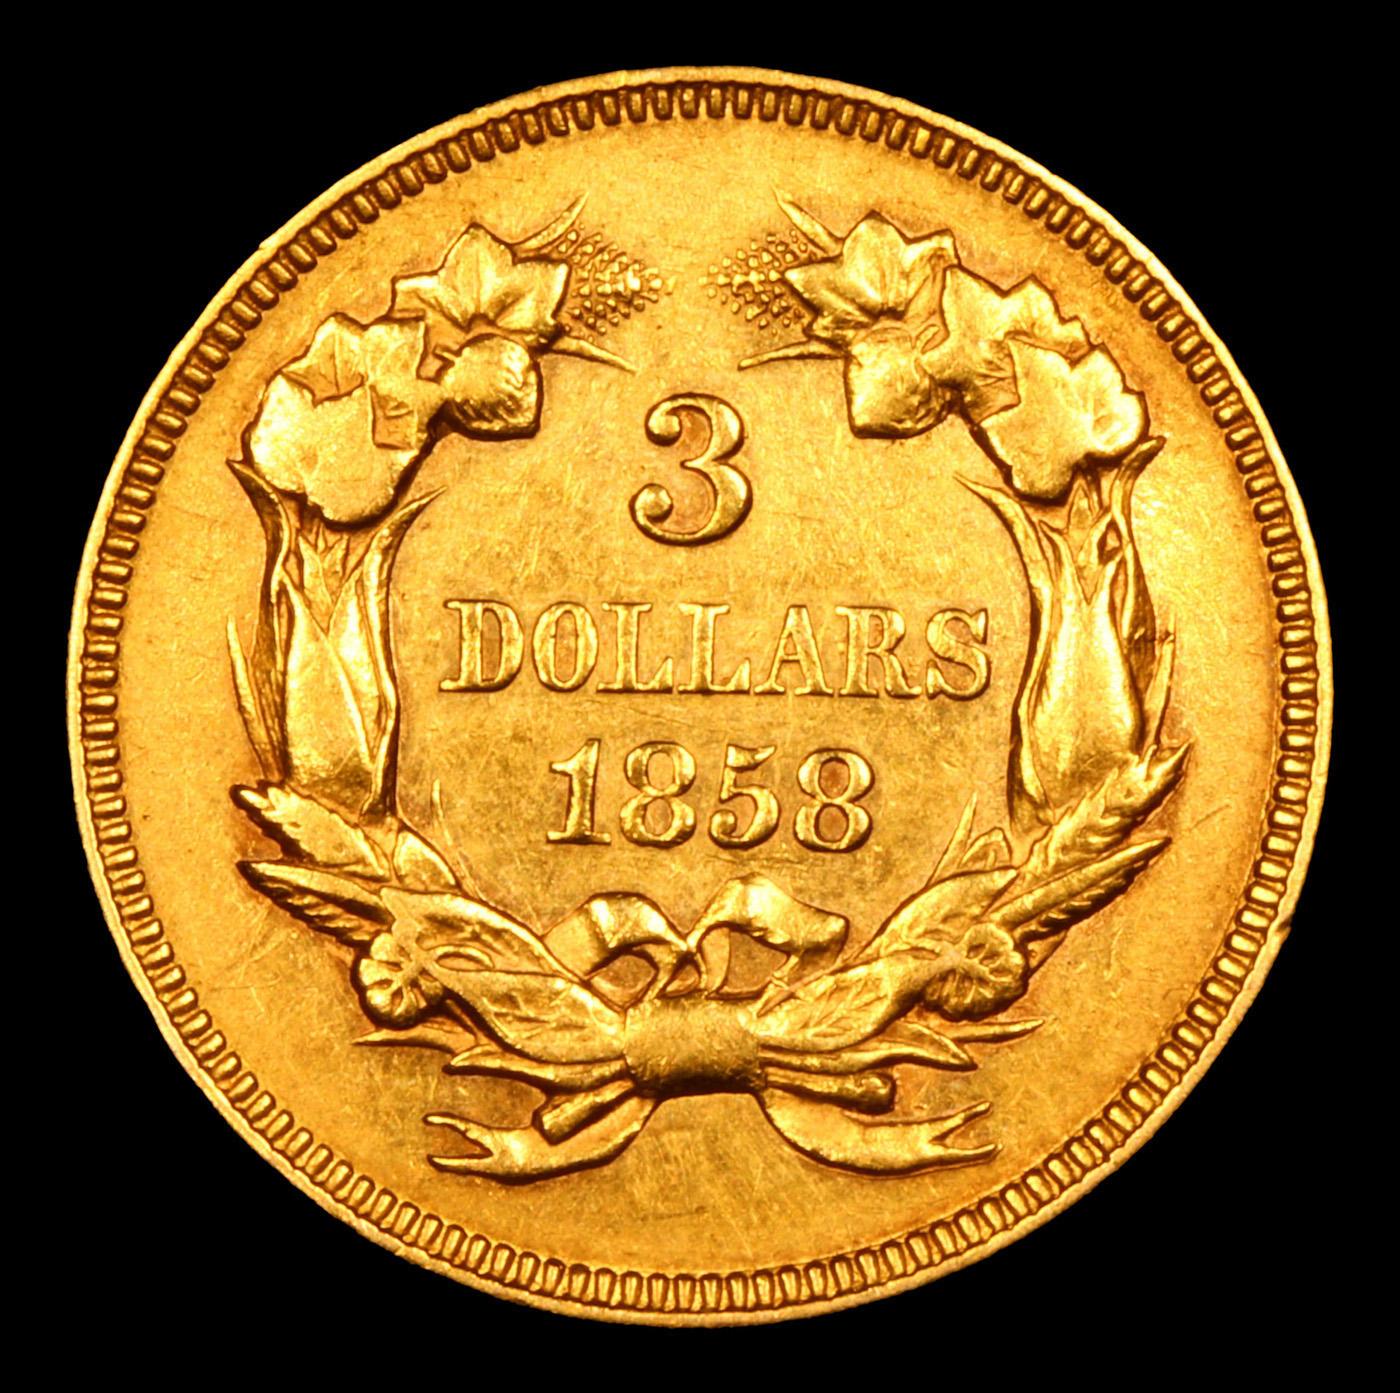 ***Auction Highlight*** 1858 Three Dollar Gold 3 Graded au55 details By SEGS (fc)